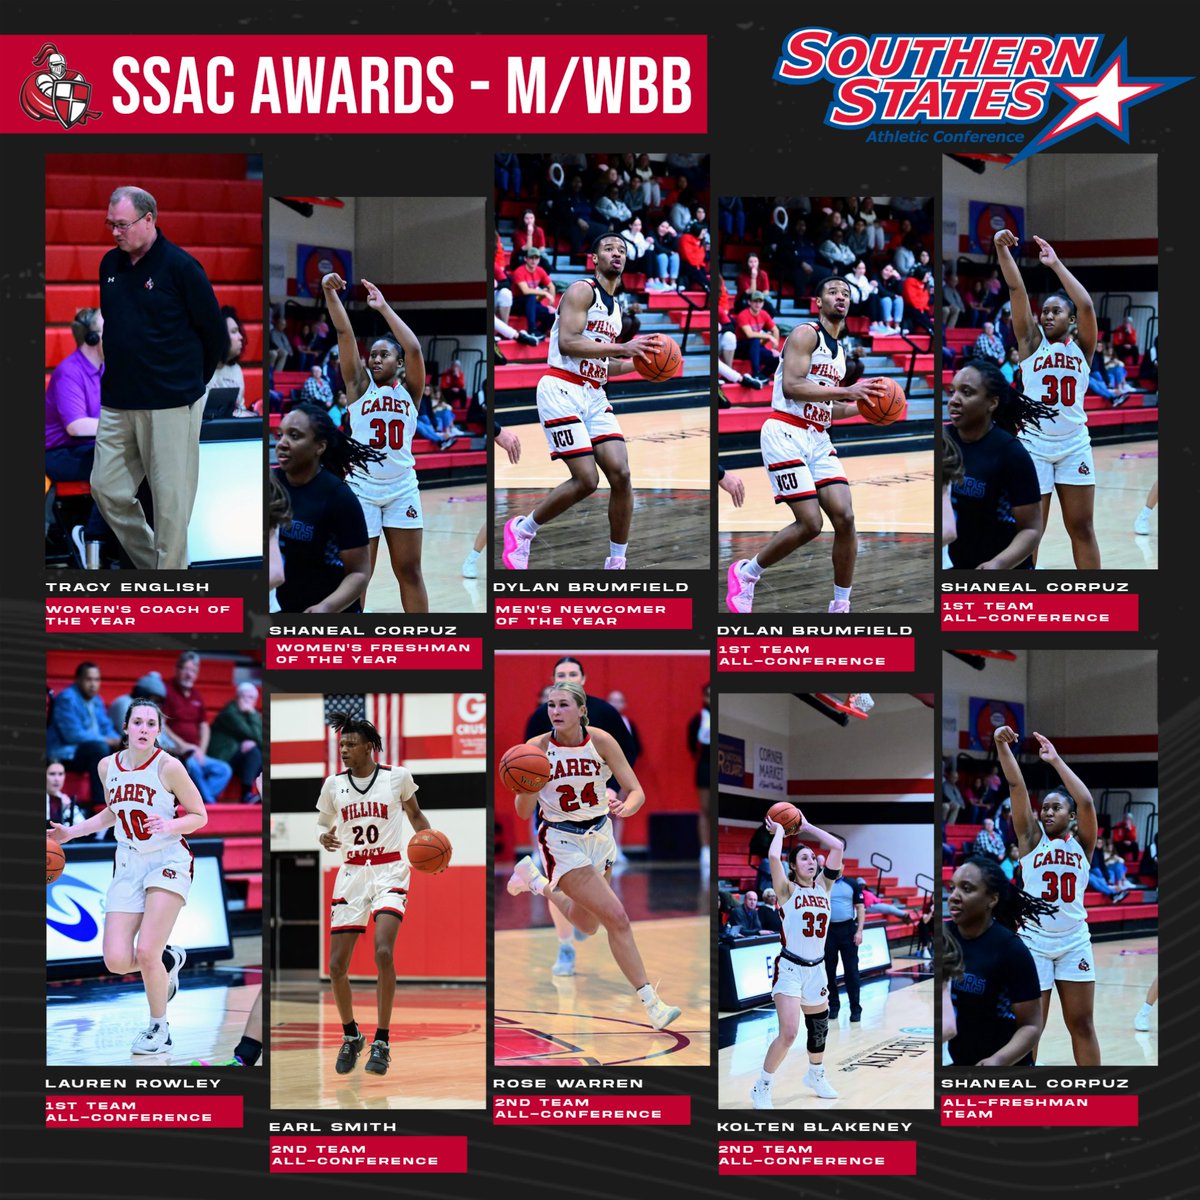 SSAC AWARDS! Men's & women's basketball had their SSAC awards banquet last night and numerous Crusaders were honored. Women's Coach of the Year - Tracy English Women's Freshman of the Year - Shaneal Corpuz Men's Newcomer of the Year - Dylan Brumfield Men's 1st Team…